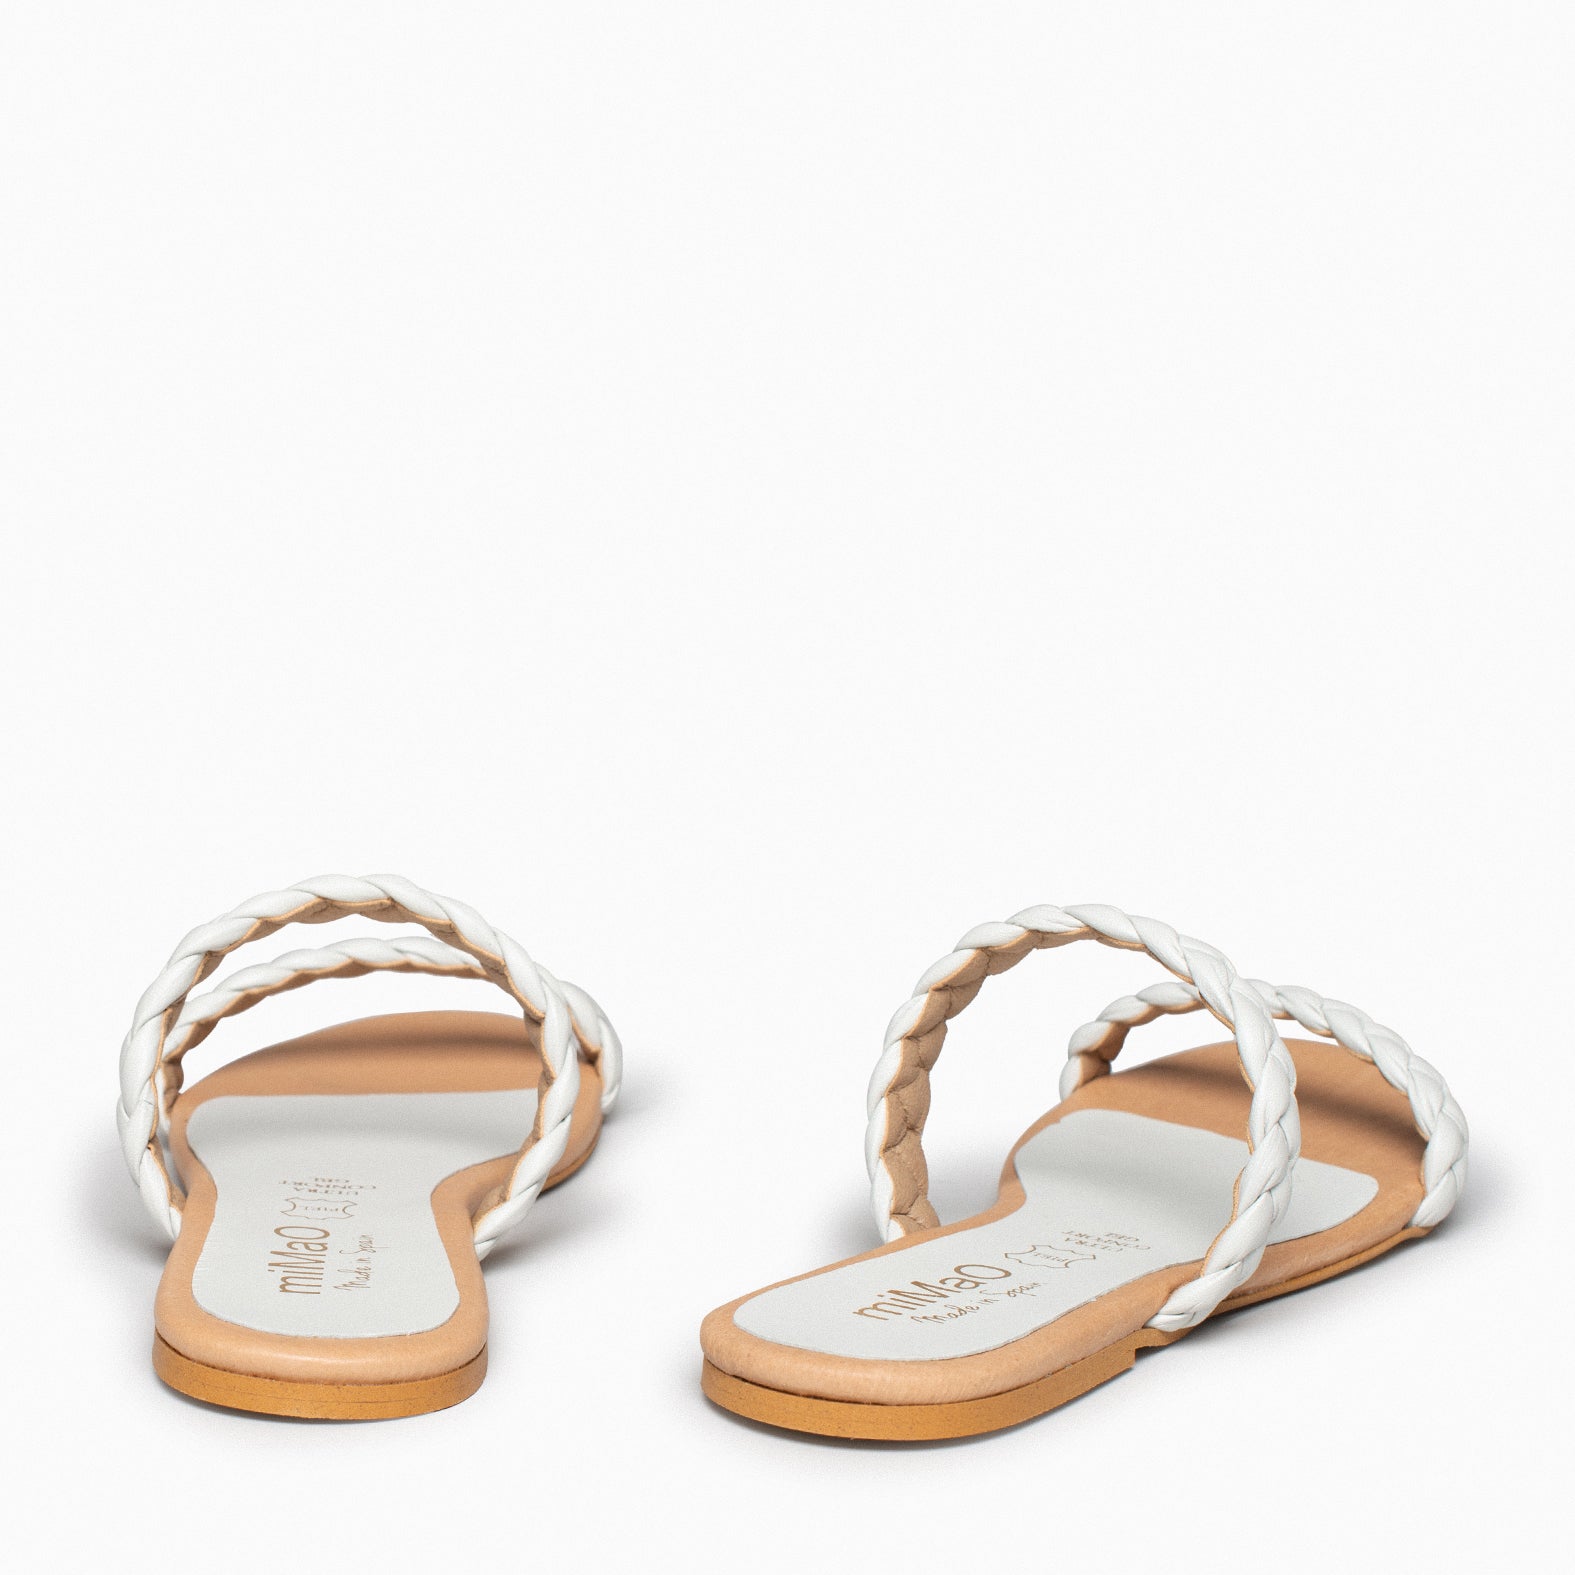 DAILY – WHITE FLAT SANDAL WITH BRAIDS